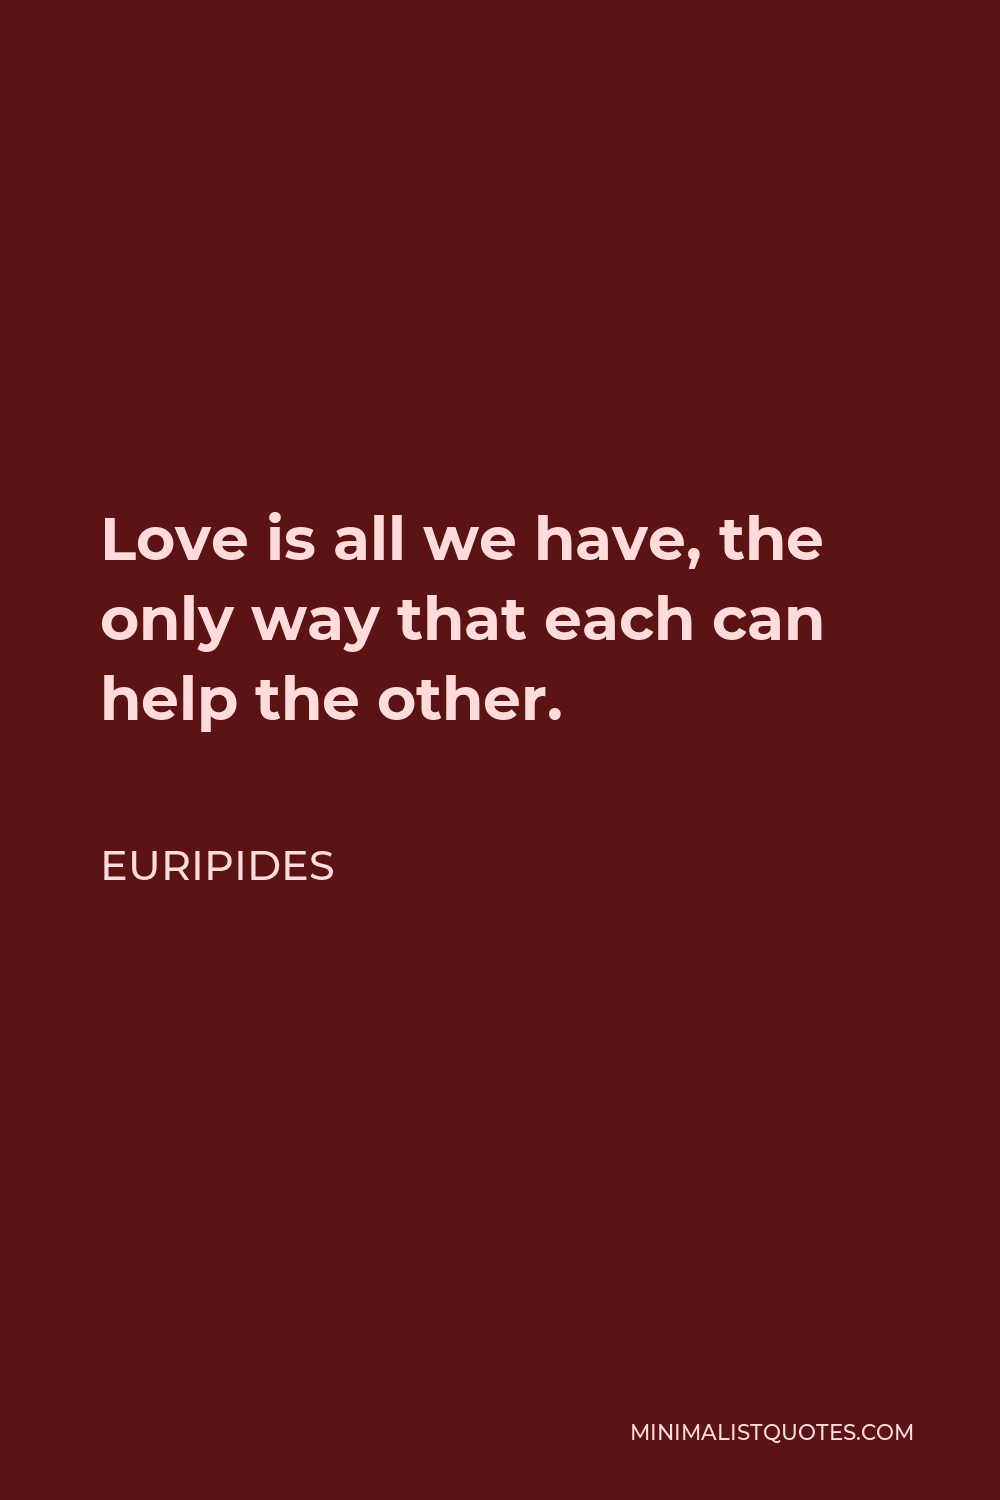 Euripides - Love is all we have, the only way that each